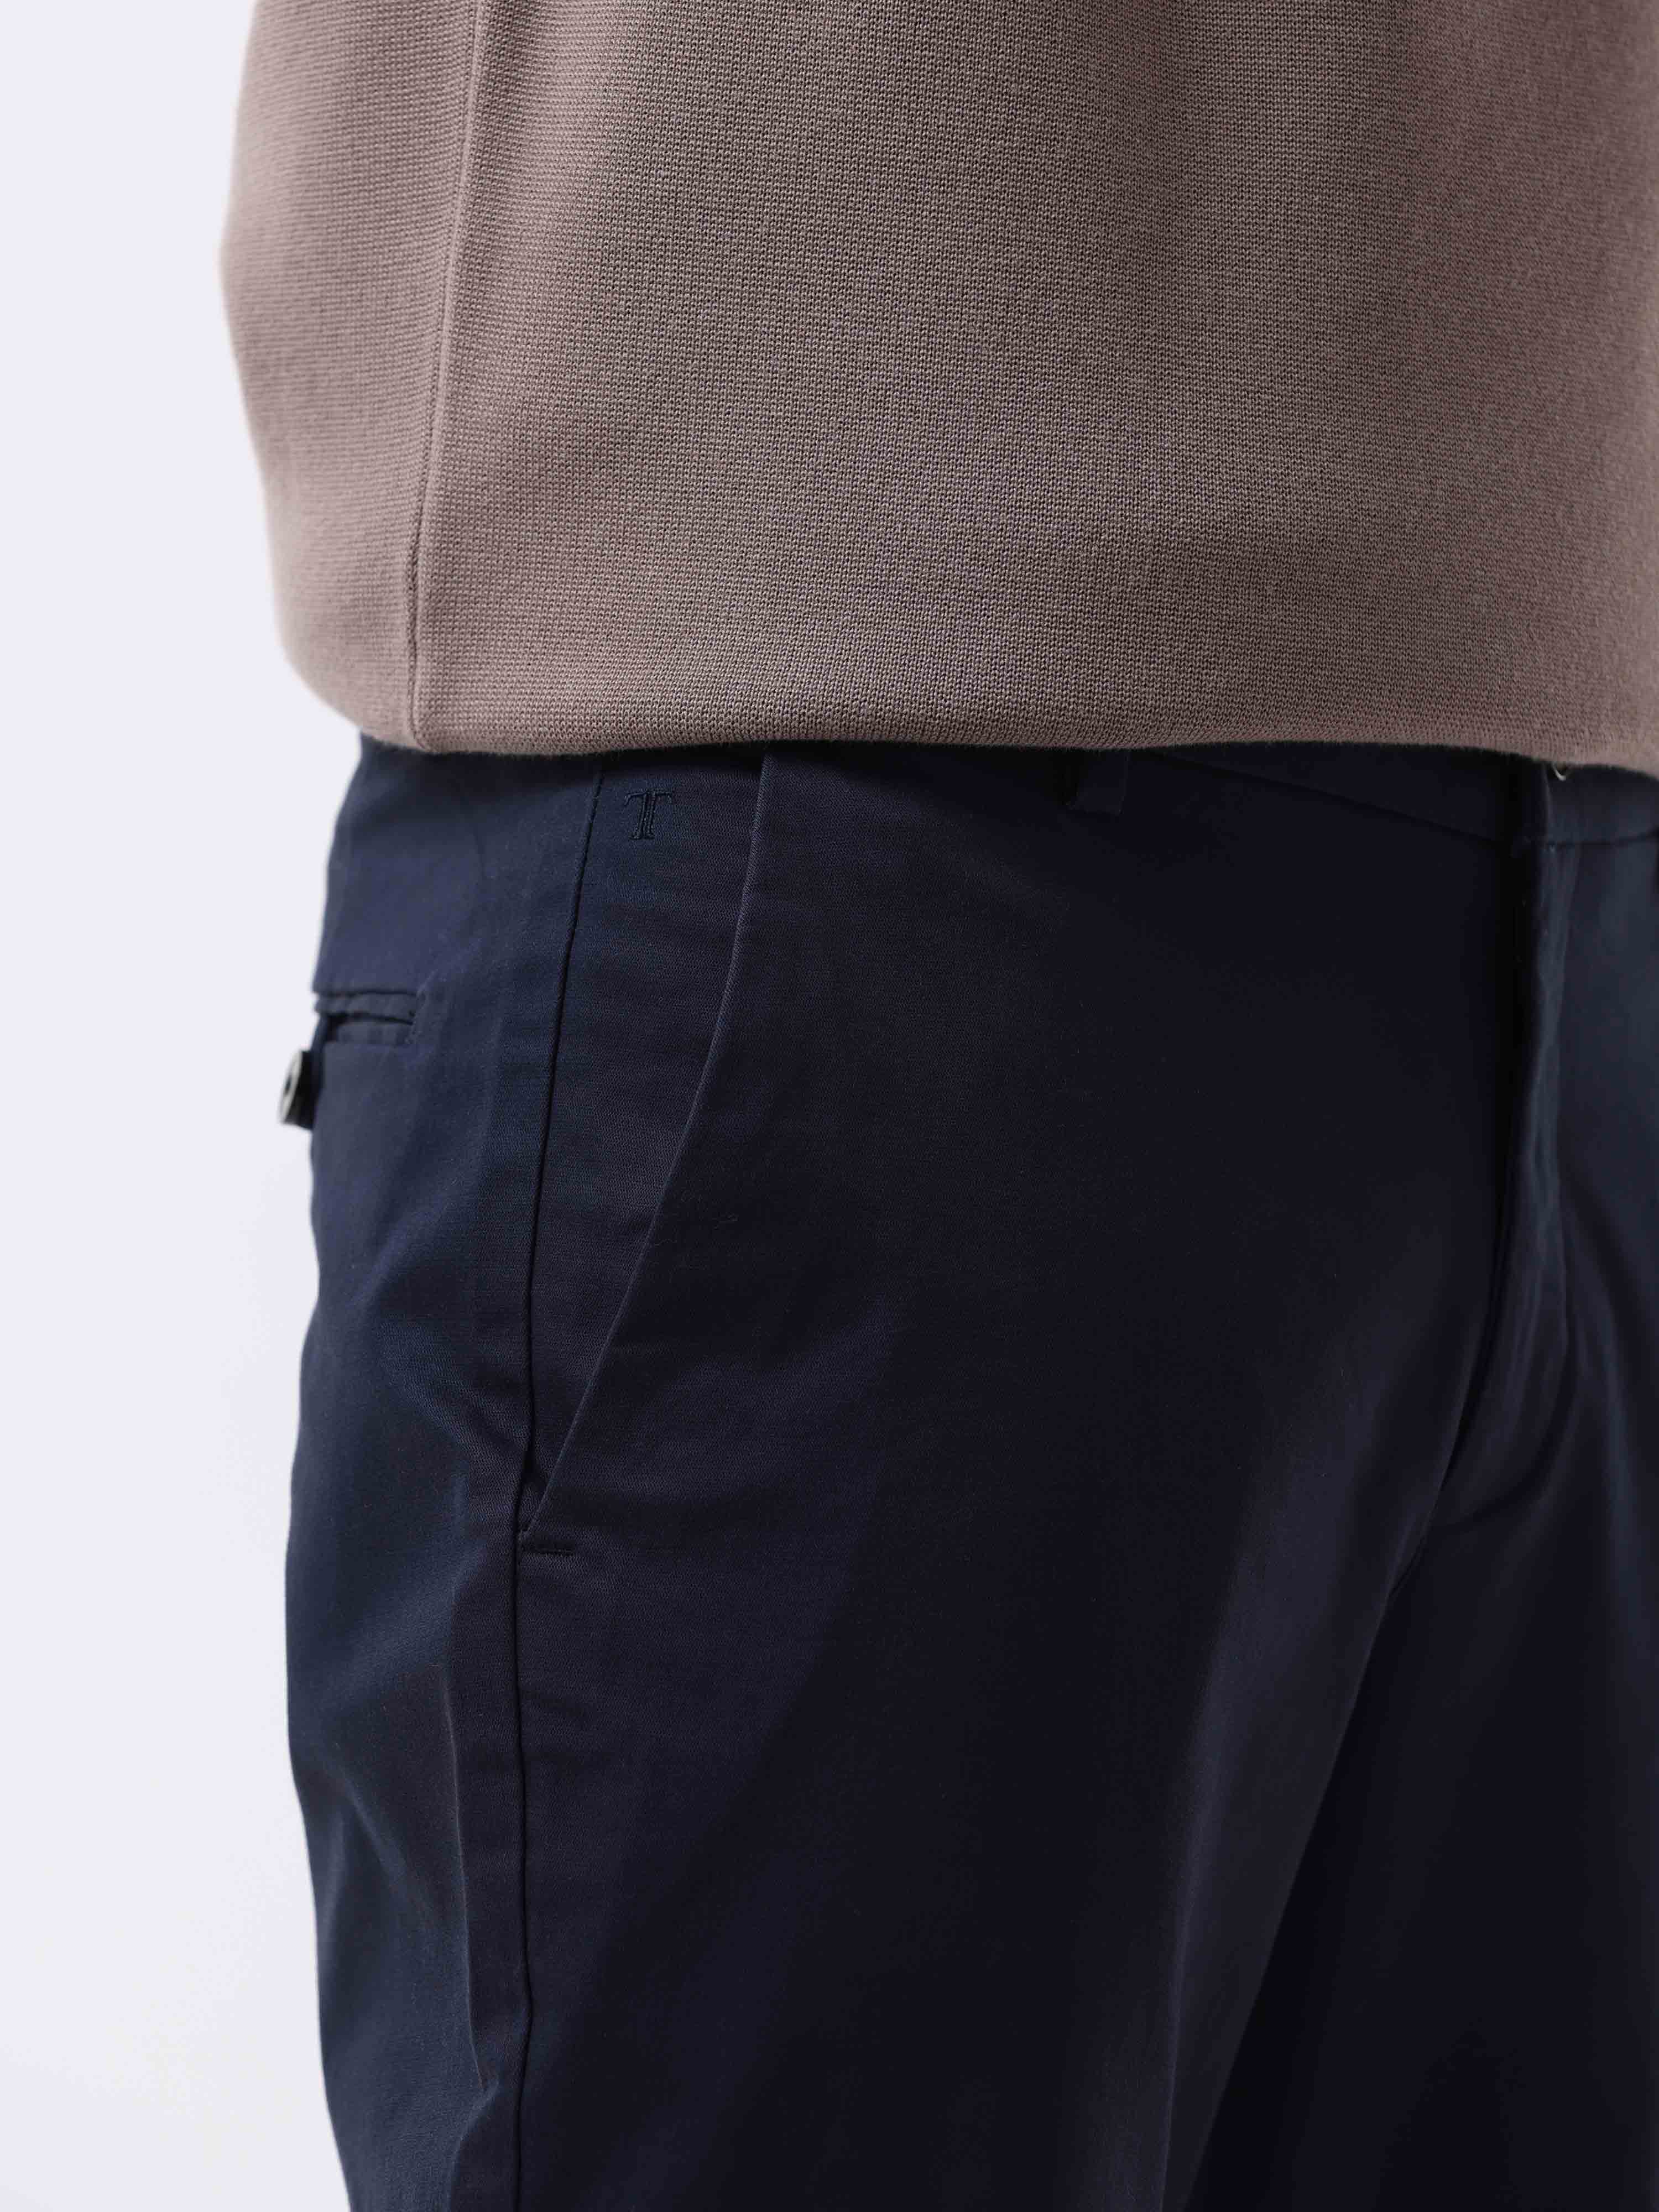 Flat Front Trouser in Navy Stretch Cotton Twill - Cad & The Dandy